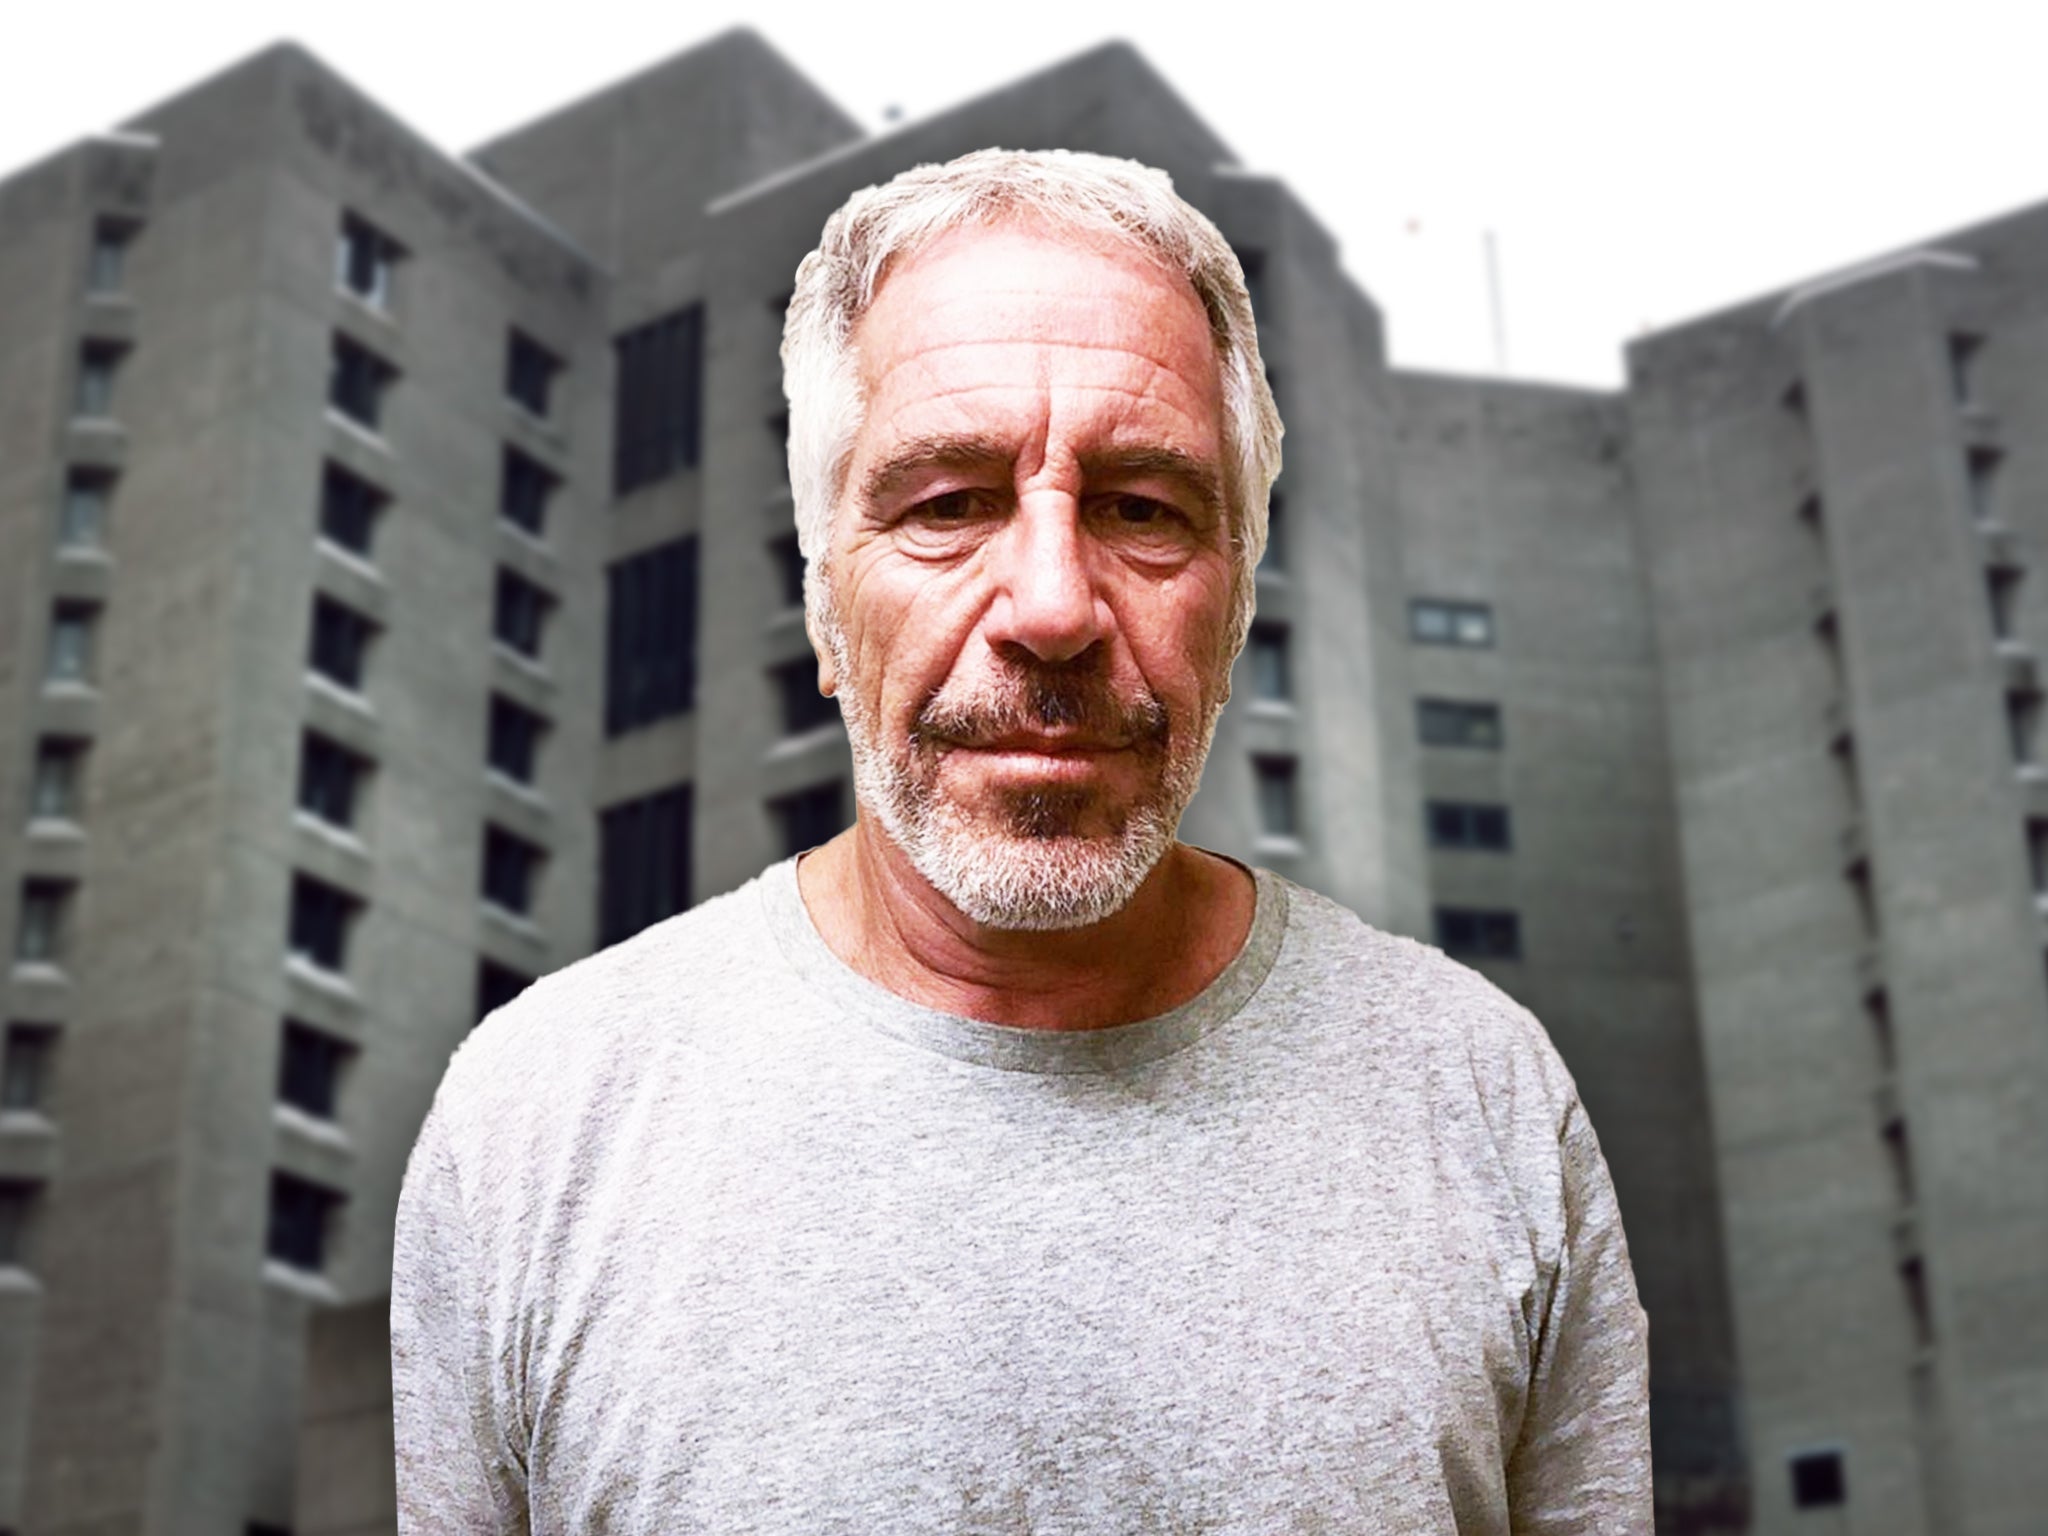 Jeffrey Epstein died aged 66 while awaiting trial on underage sex trafficking charges